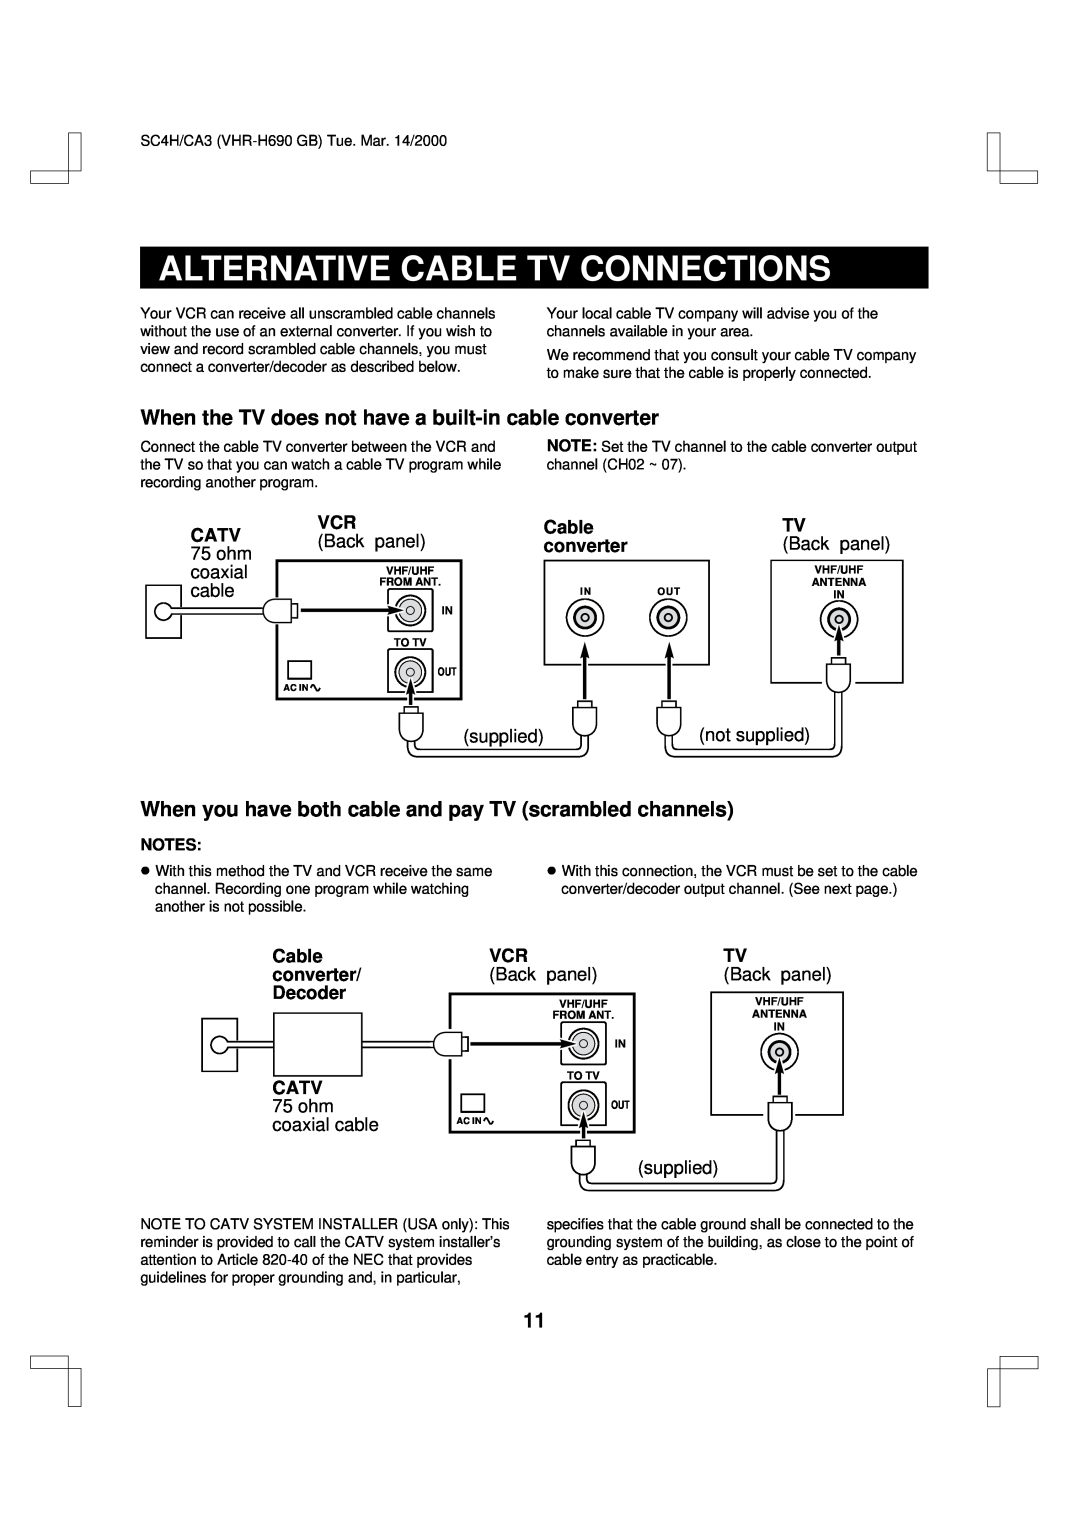 Sanyo VHR-H690 Alternative Cable Tv Connections, When the TV does not have a built-in cable converter, Catv, Back, panel 